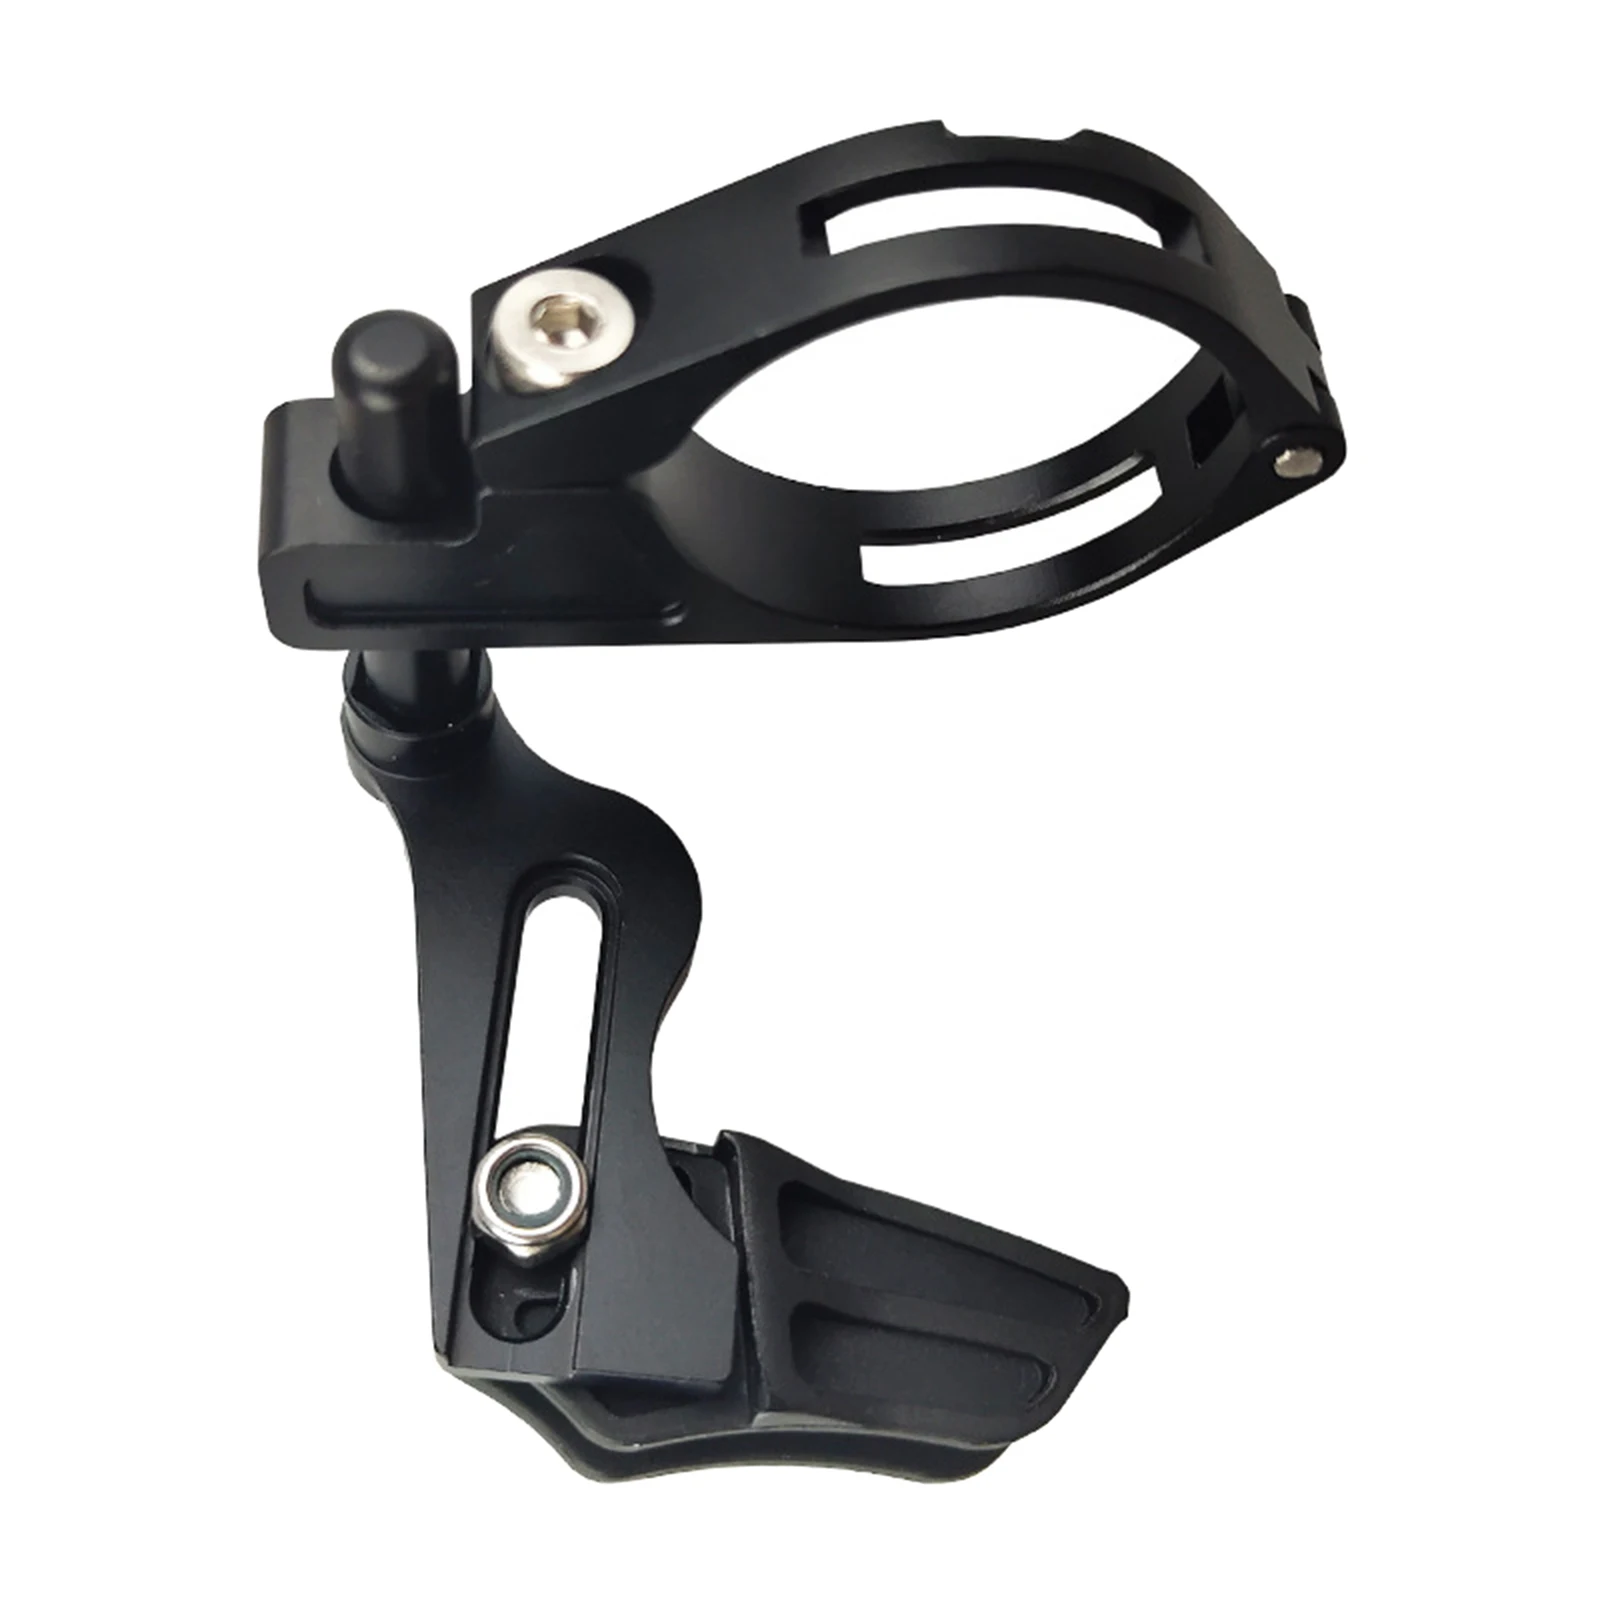 Mountain Bike Chain Guide, Clamp on (31.8-35mm) Ultralight & High Strength Aluminium Alloy Chainring Protector